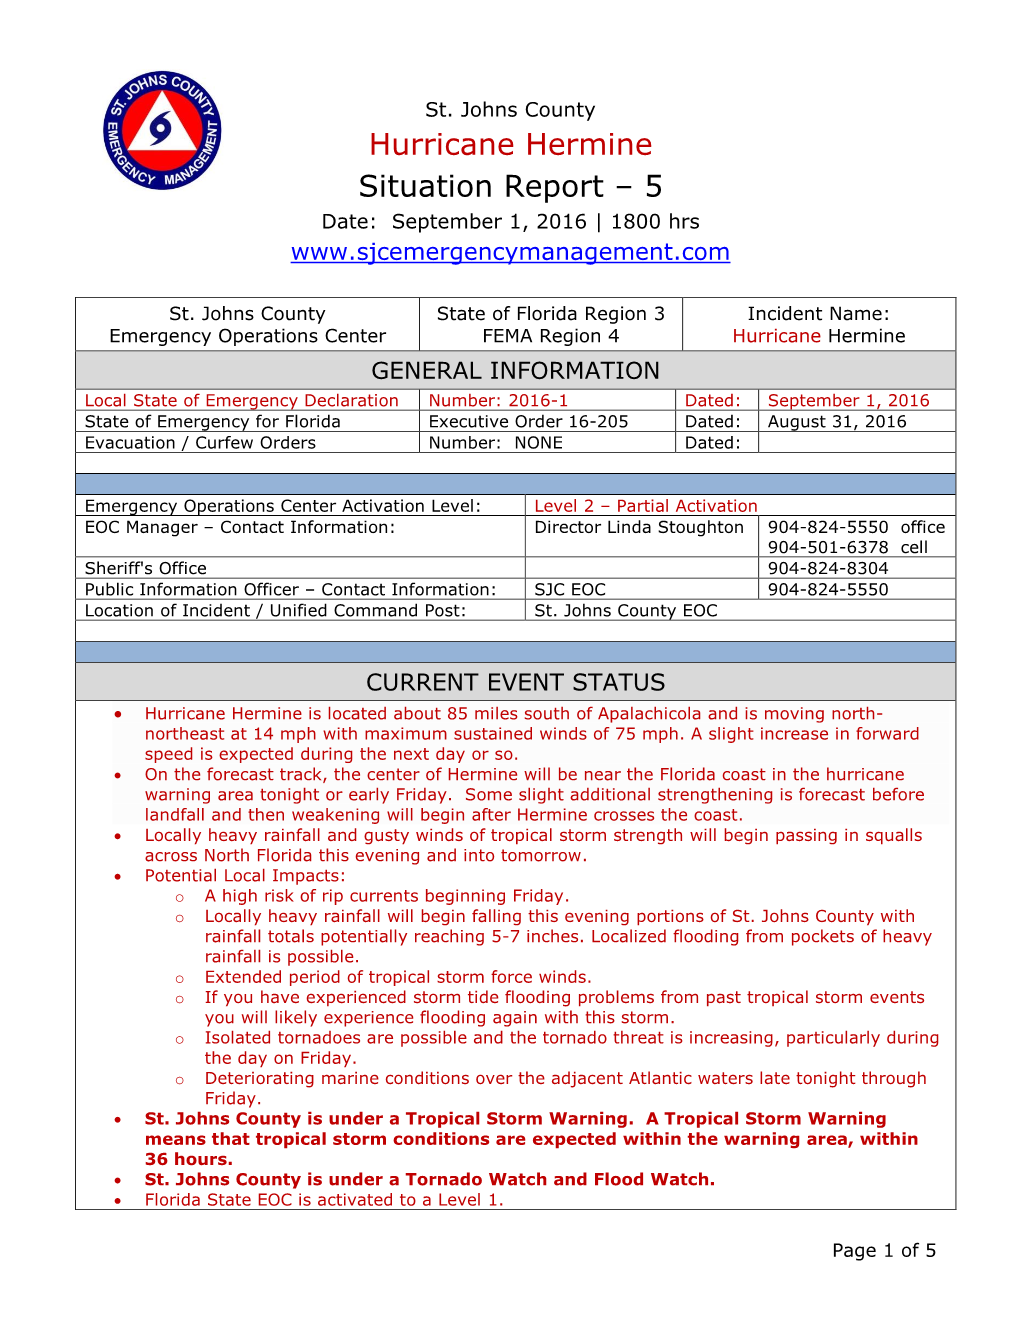 Hurricane Hermine Situation Report – 5 Date: September 1, 2016 | 1800 Hrs